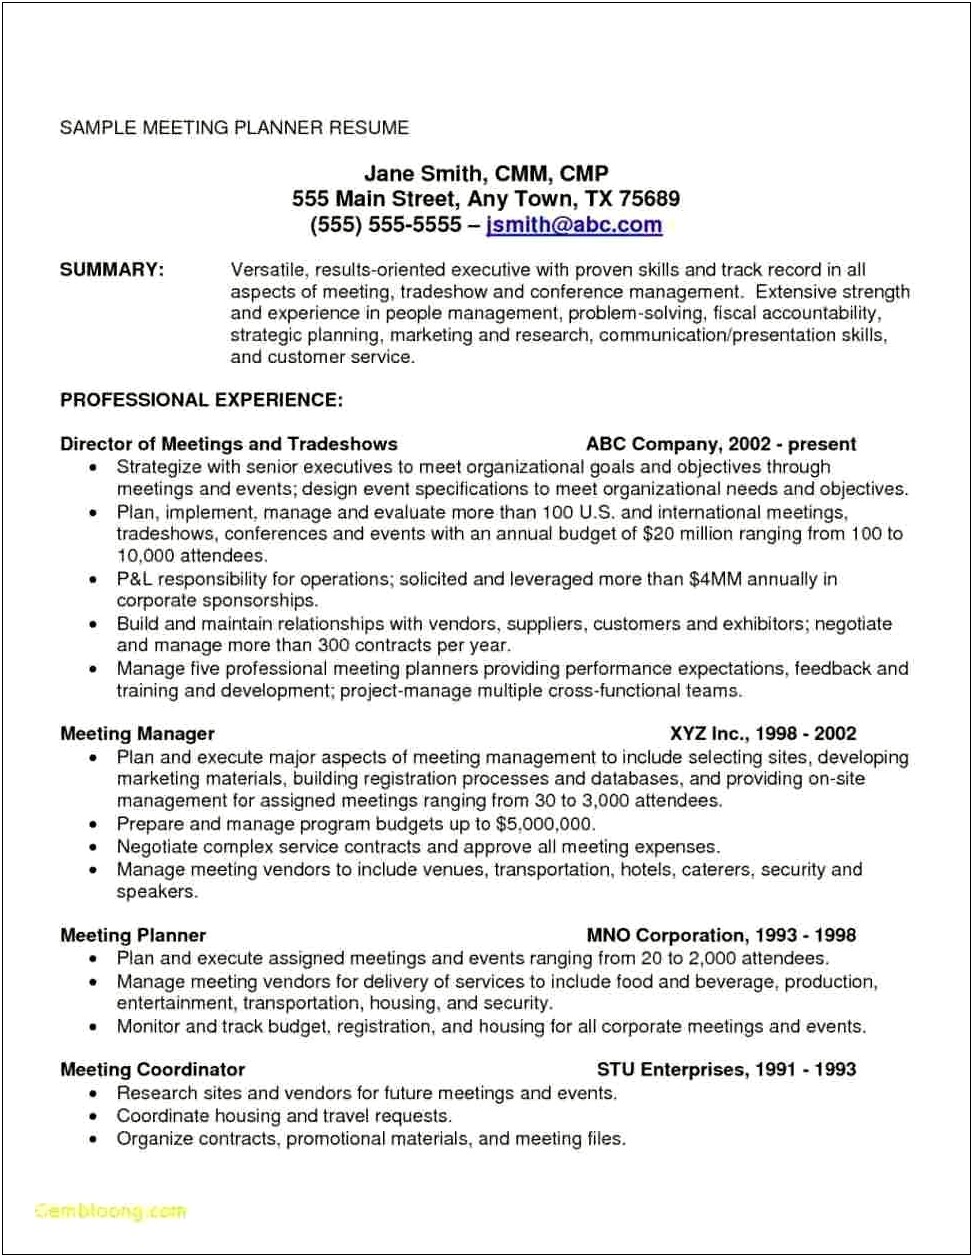 Best Resume Statements For Outcome Orientation